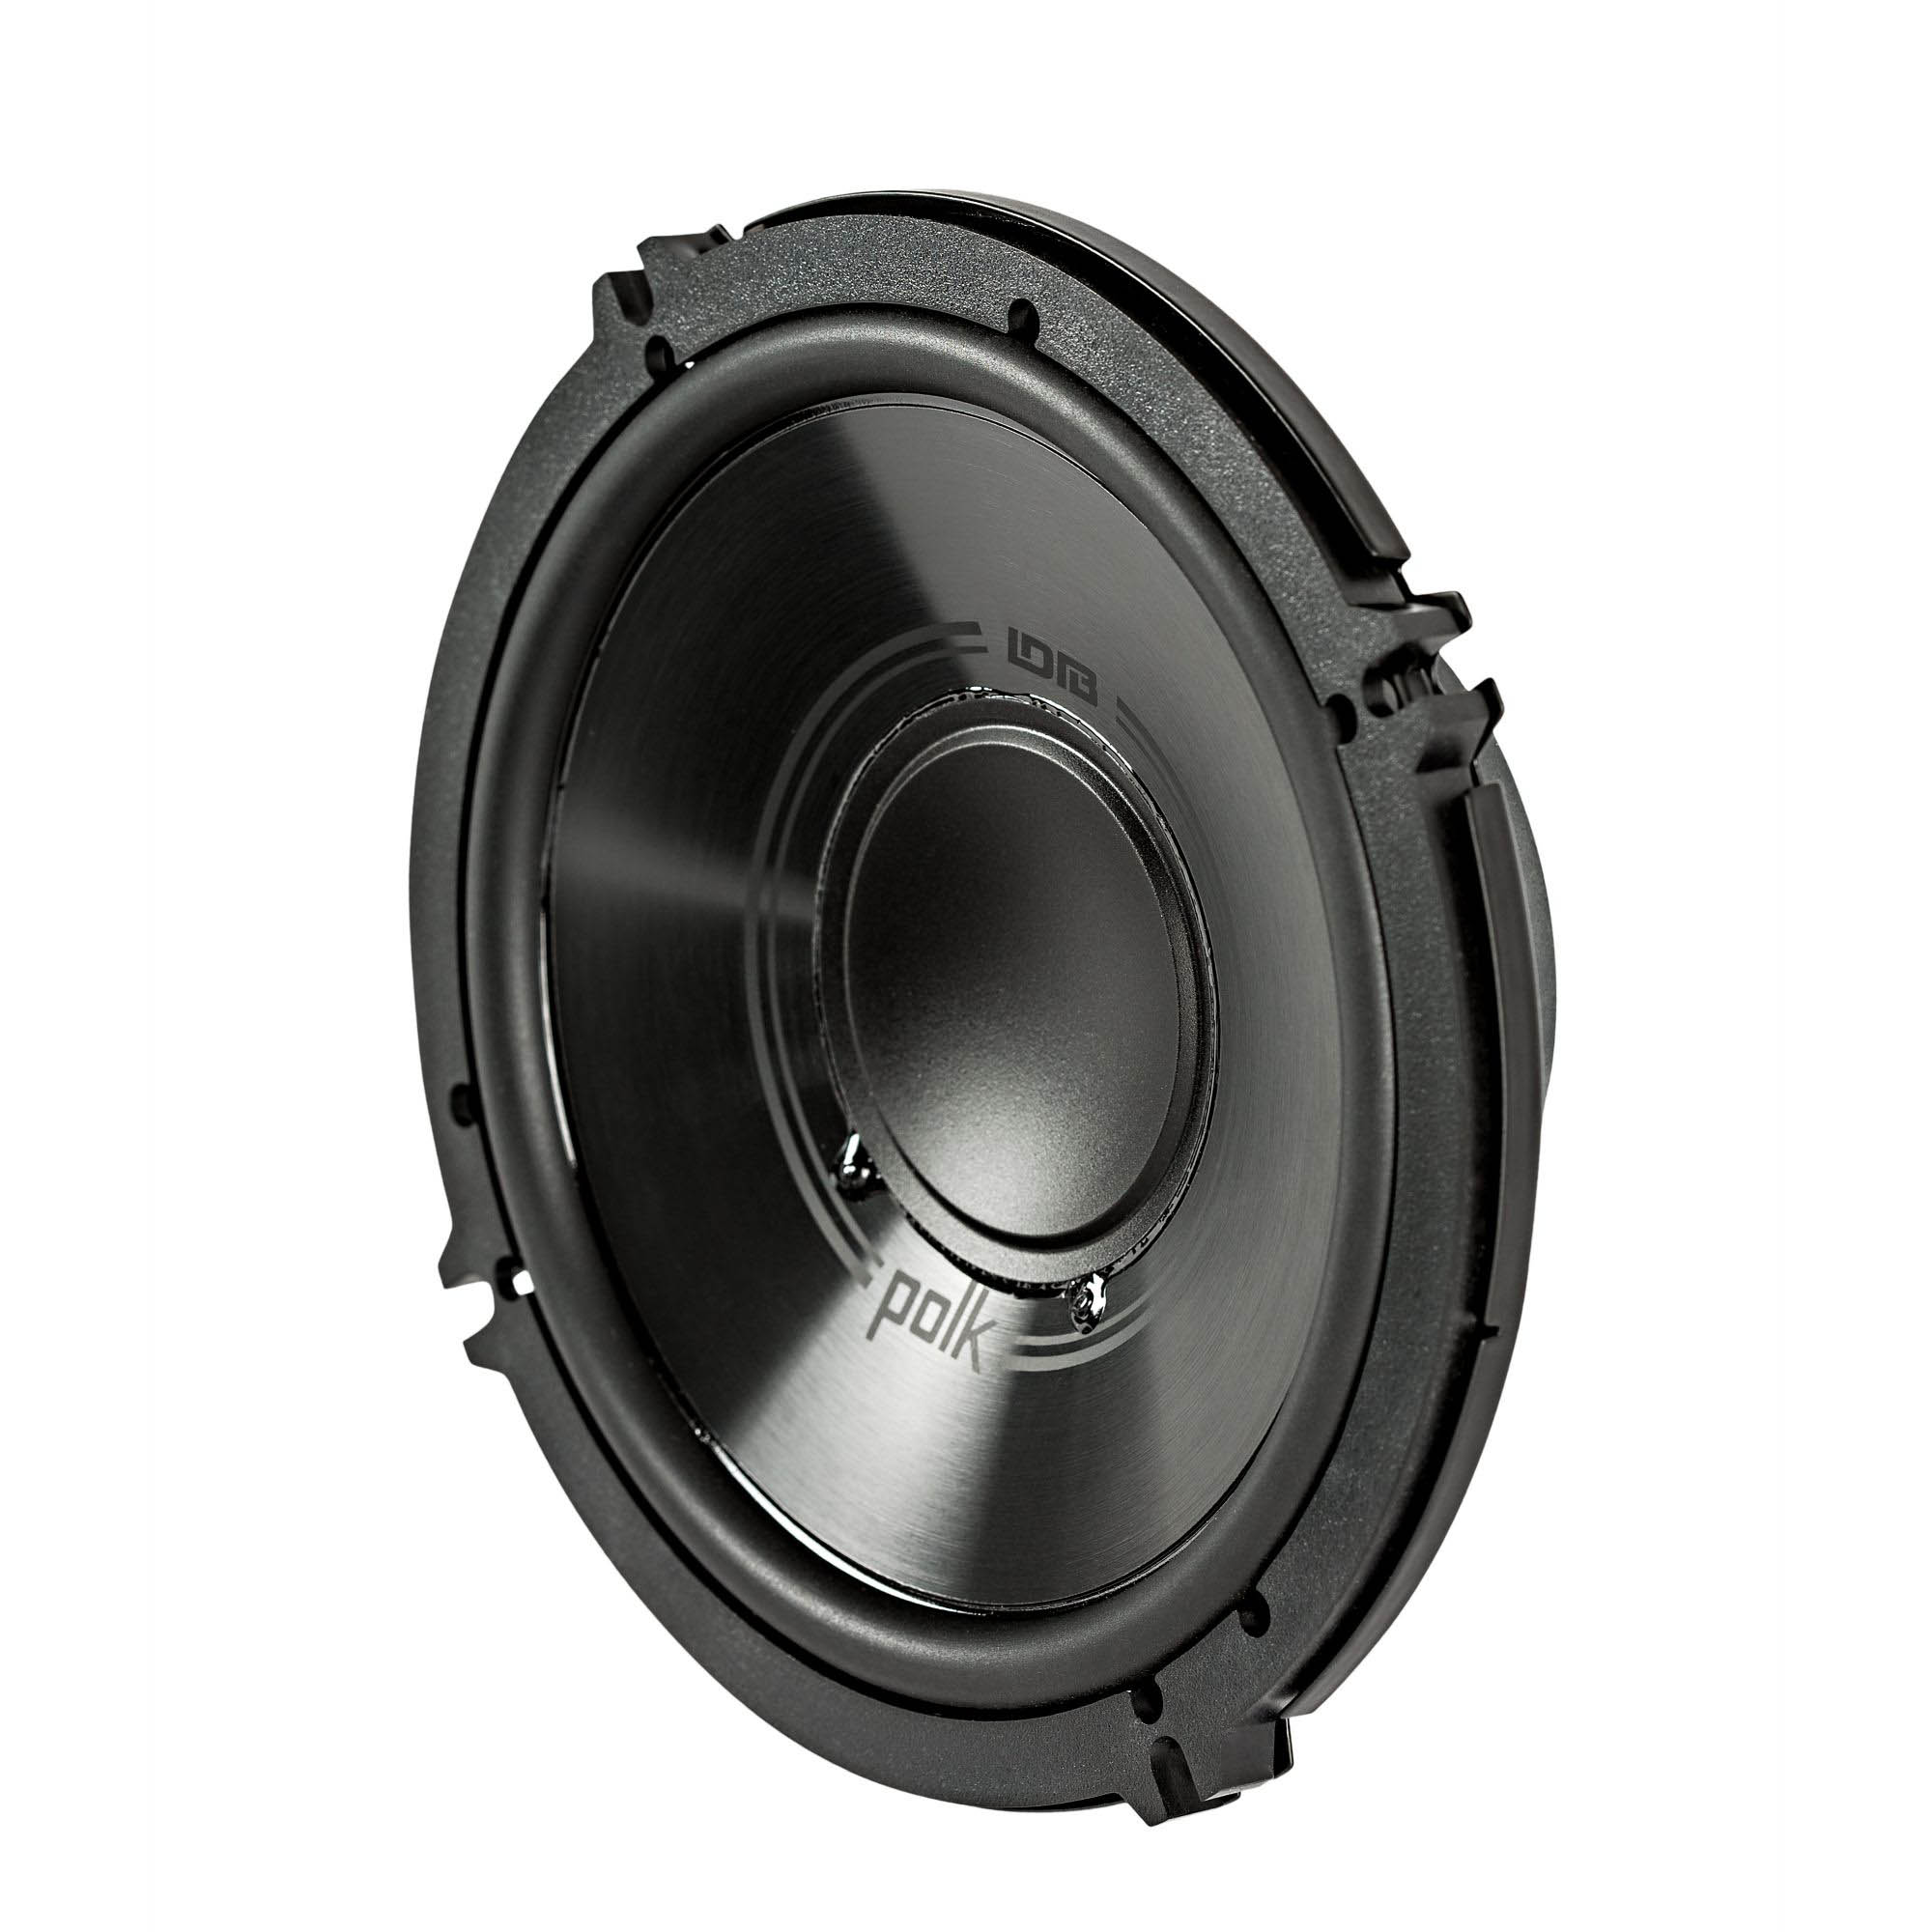 Polk Audio - A Pair Of DB6502 6.5" Components and A Pair Of DB572 5x7" Coax Speakers - Bundle Includes 2 Pair - image 4 of 7